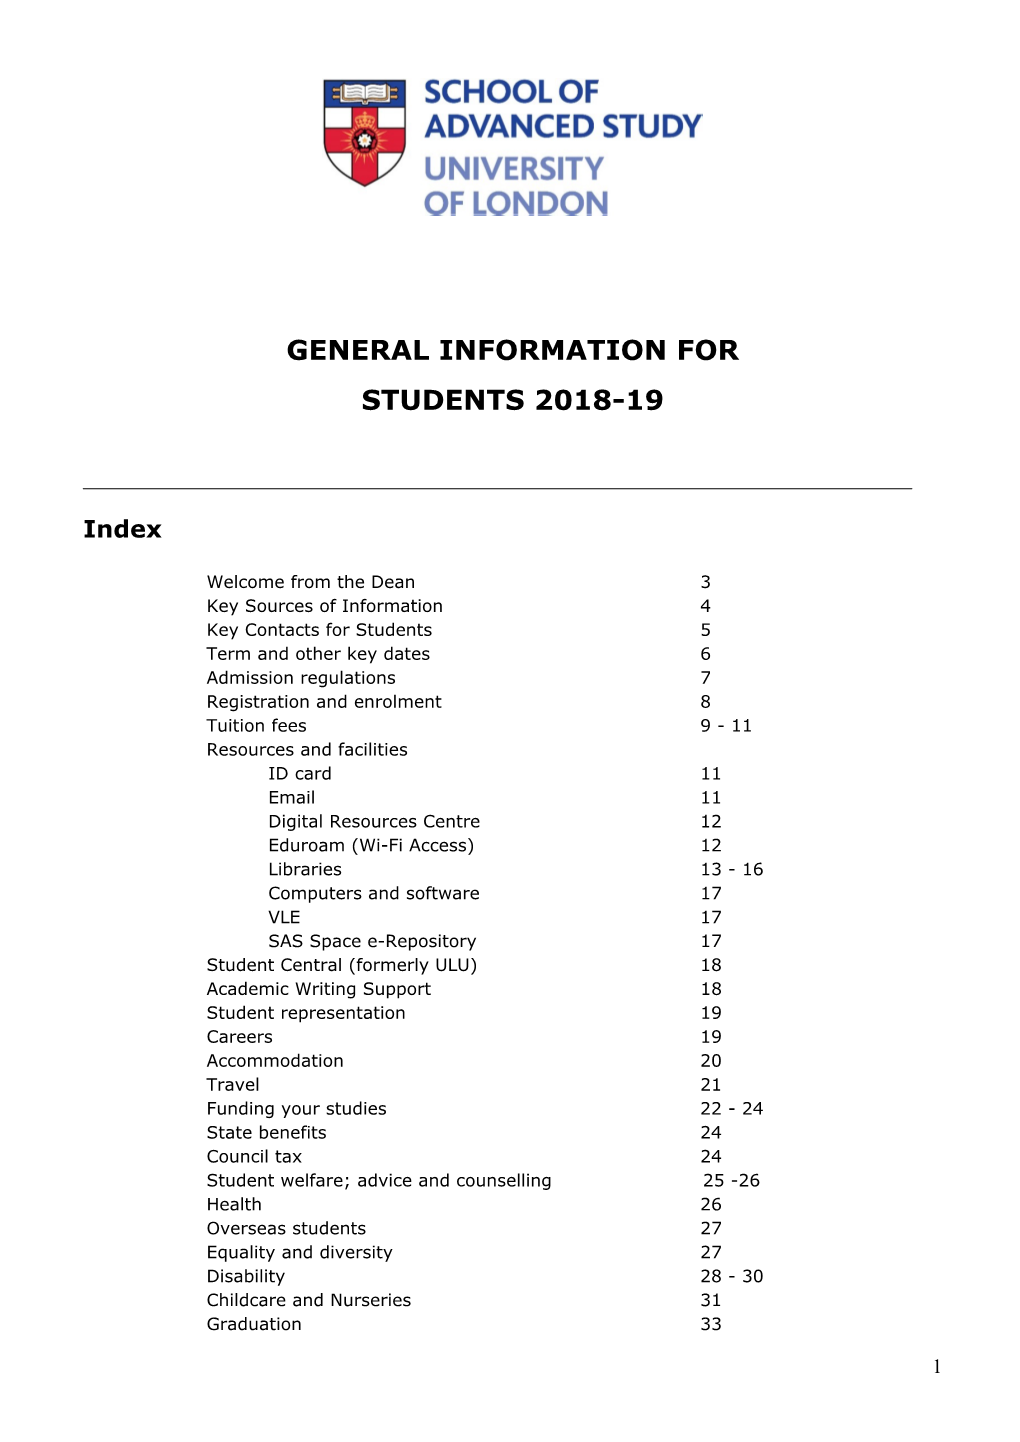 General Information for Students 2018-19.Pdf